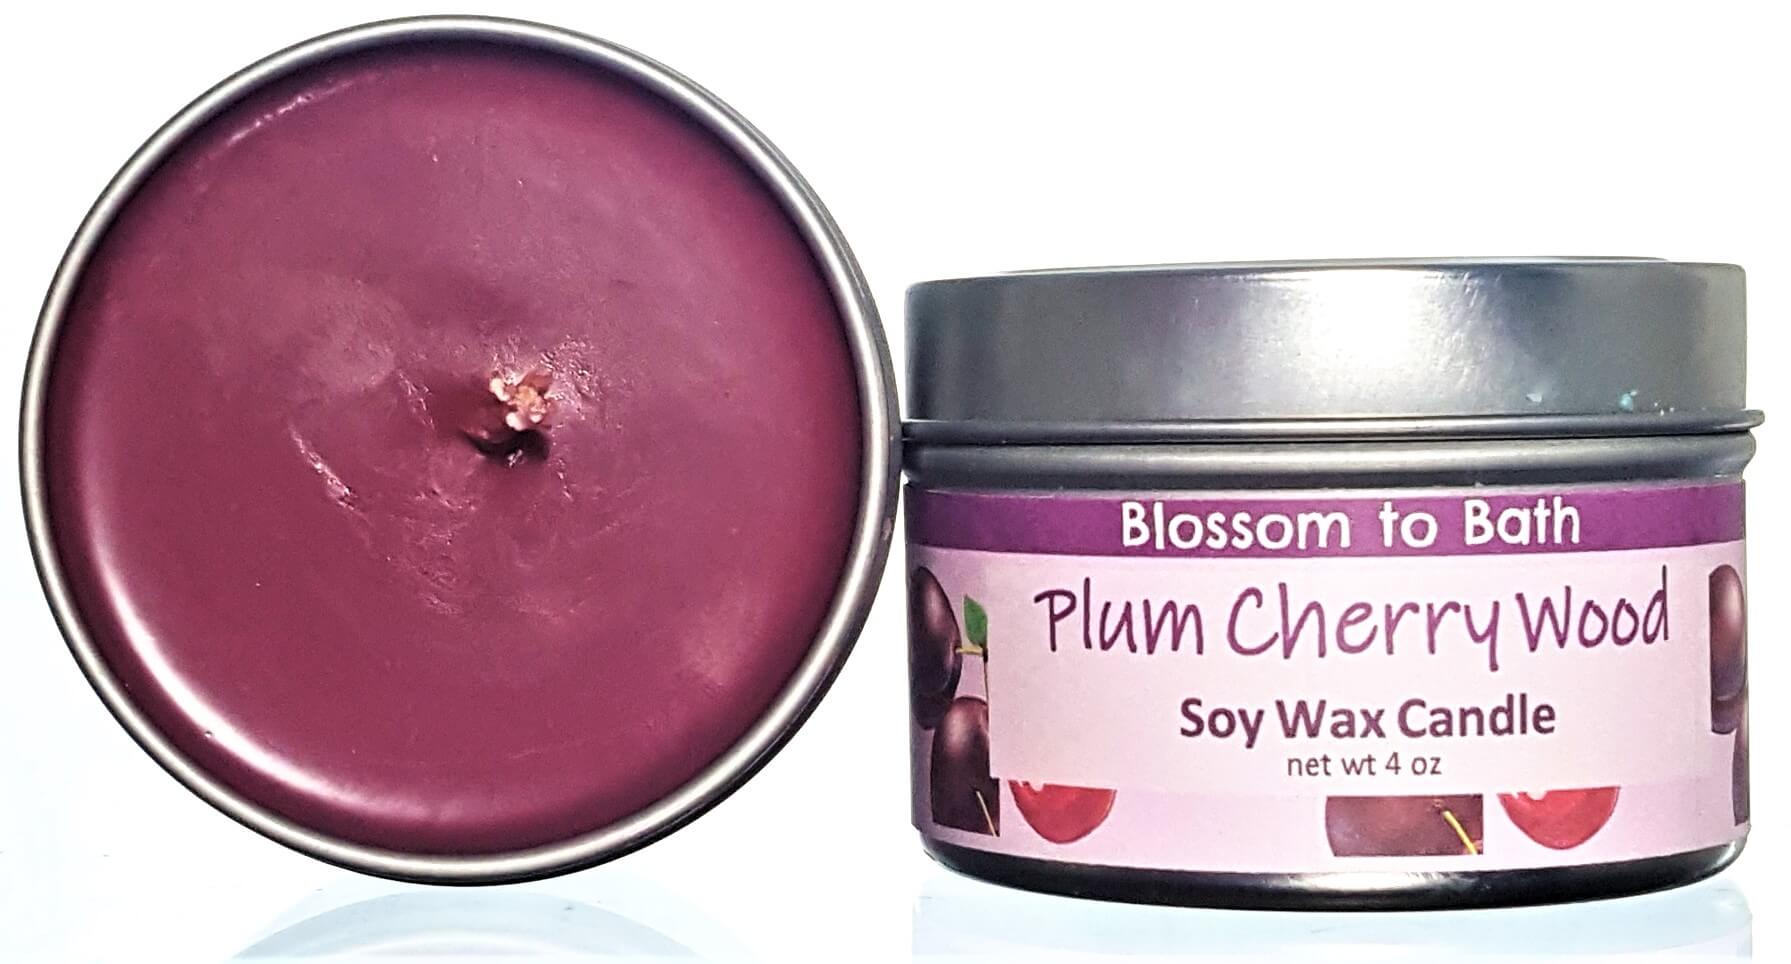 Buy Blossom to Bath Plum Cherry Wood Soy Wax Candle from Flowersong Soap Studio.  Fill the air with a charming fragrance that lasts for hours  A charmingly sweet and woodsy fragrance.